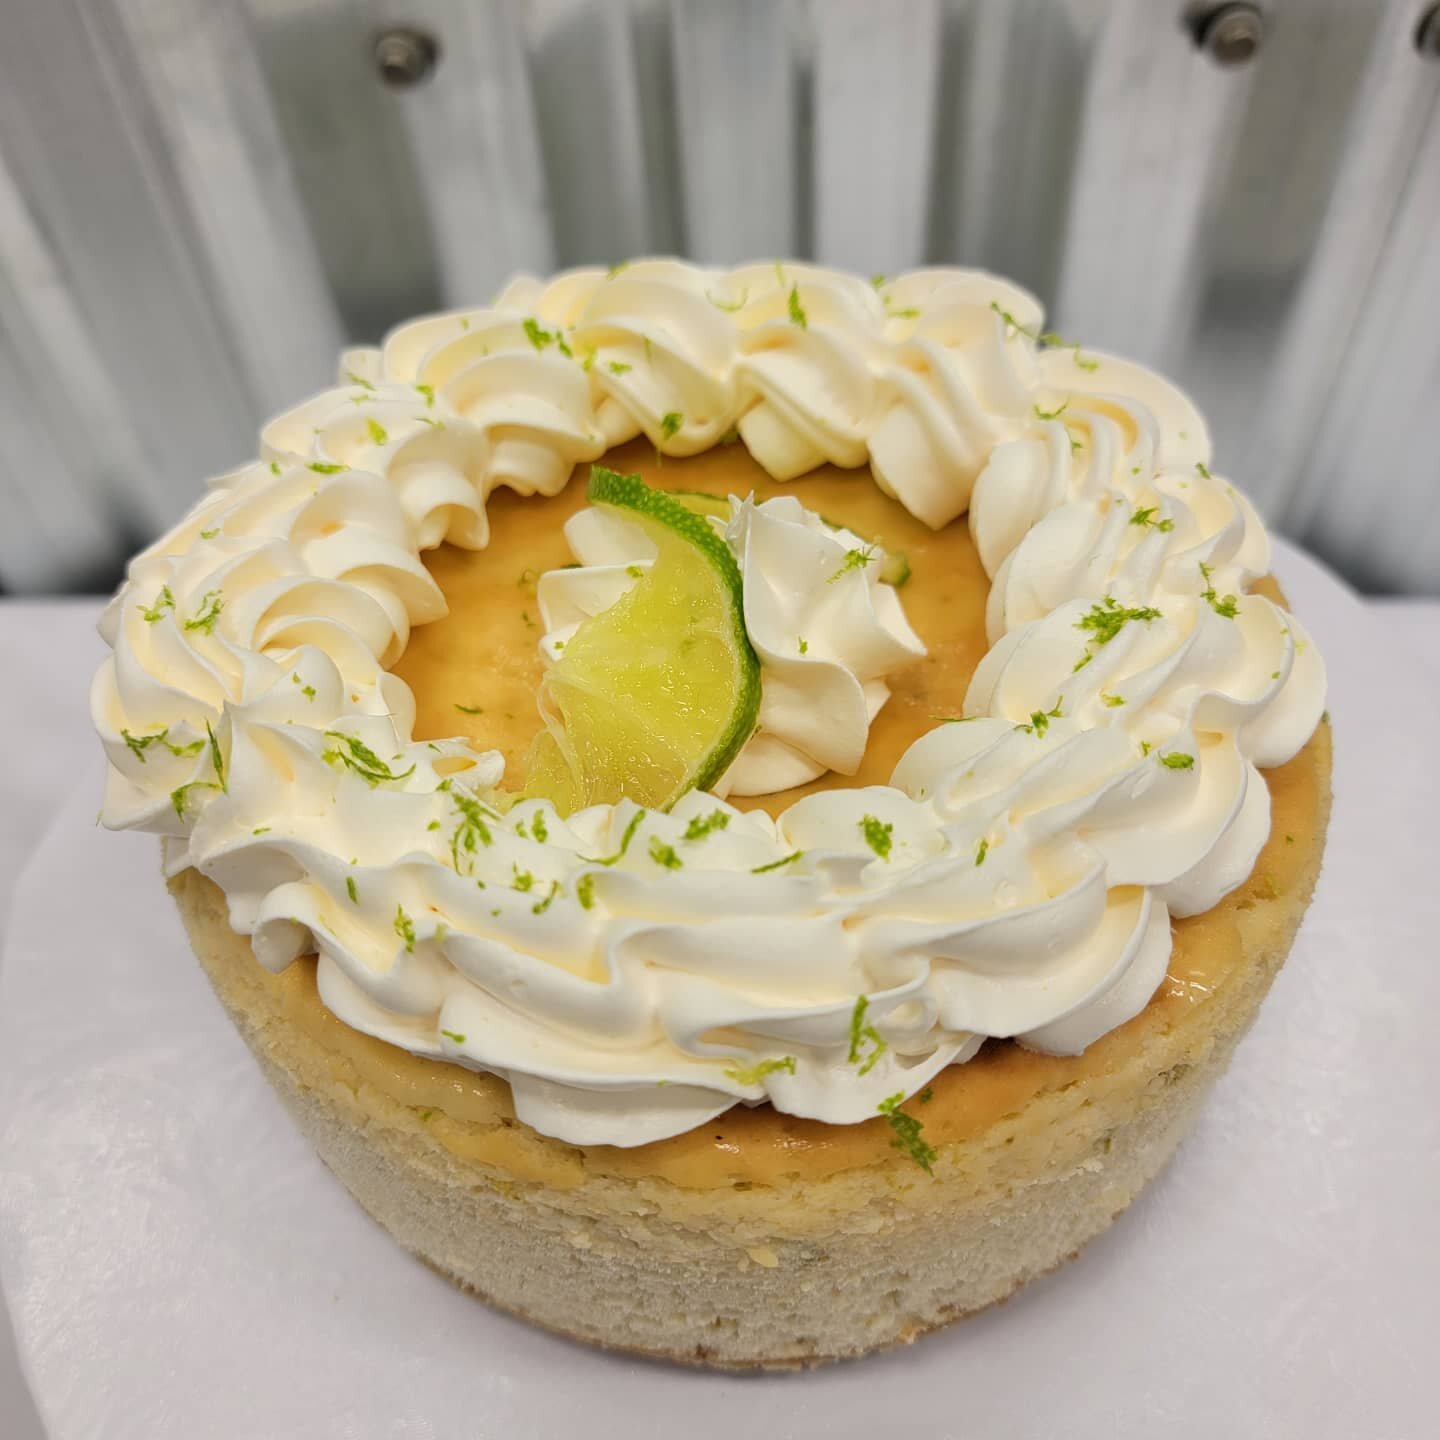 Have you tried our key lime cheesecake? Order it from us or enjoy a slice at @graytonseafoodco 

#sweetnessinyourlife #bestcakeson30a #graytonseafoodco #cheesecakes #seagroveplaza #southwalton #30alocalbusiness #madefromscratch #madewithlove #sweeton